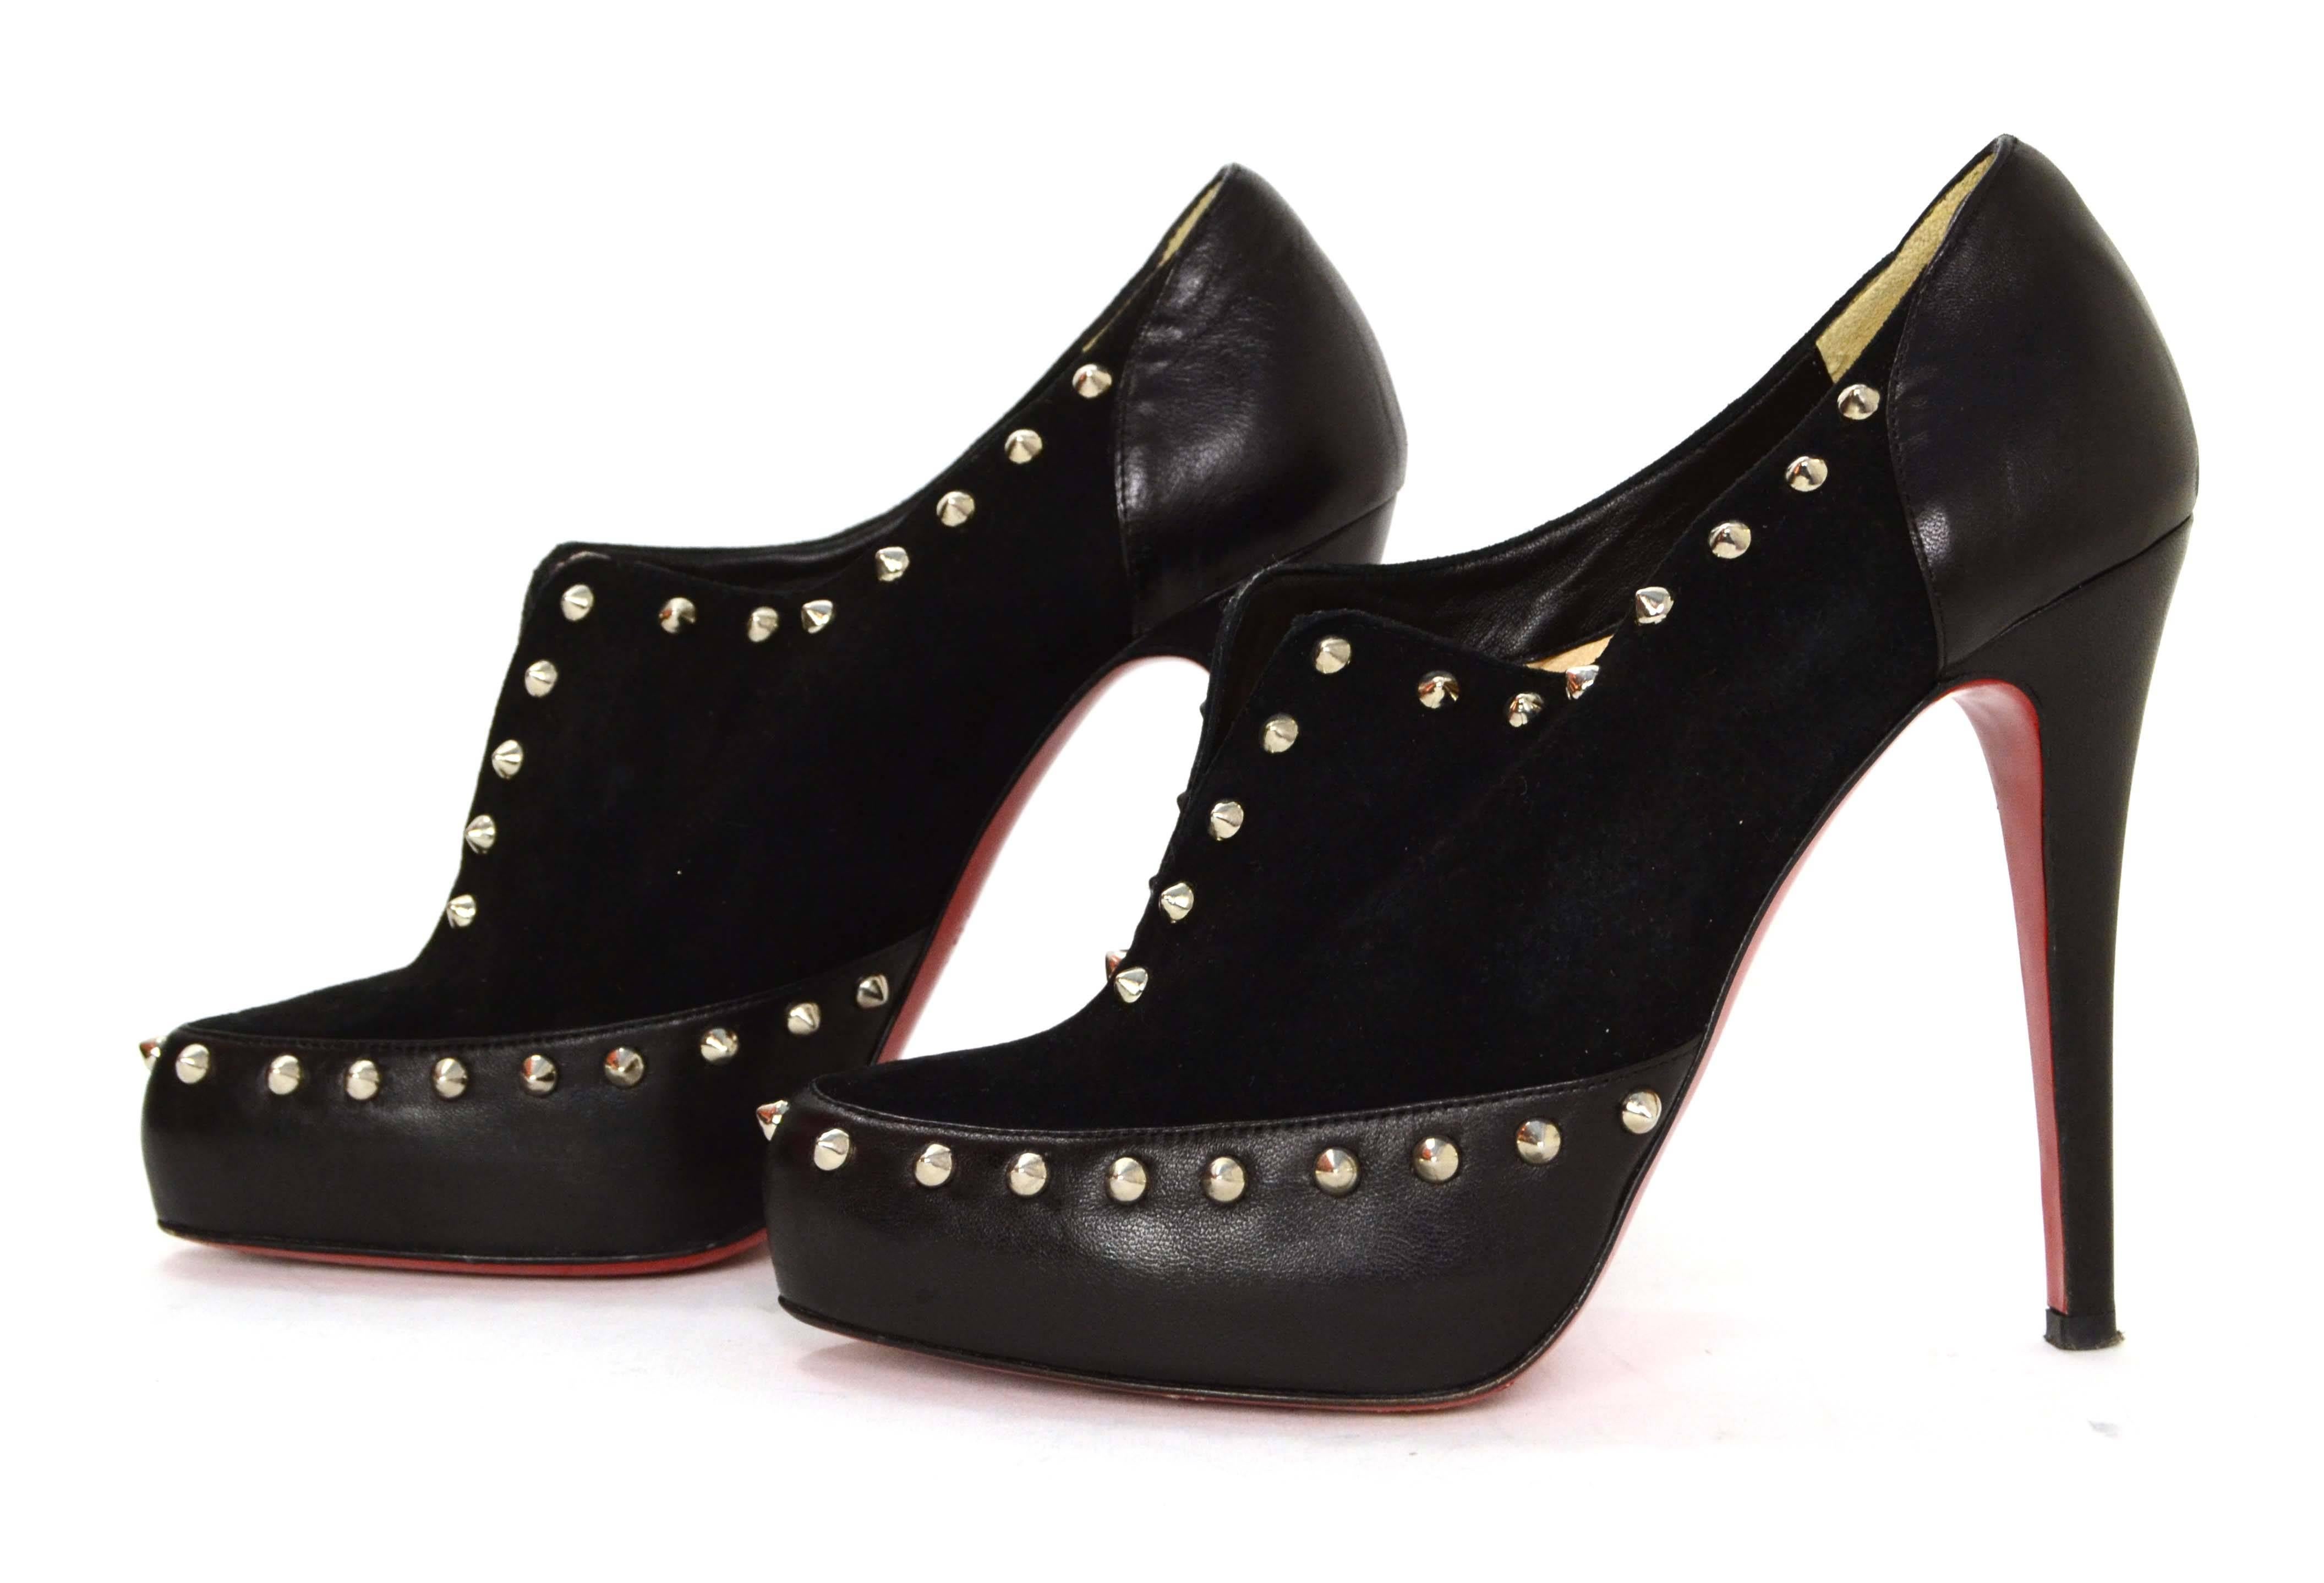 Women's Christian Louboutin Black Suede & Leather Booties With Studs sz. 38